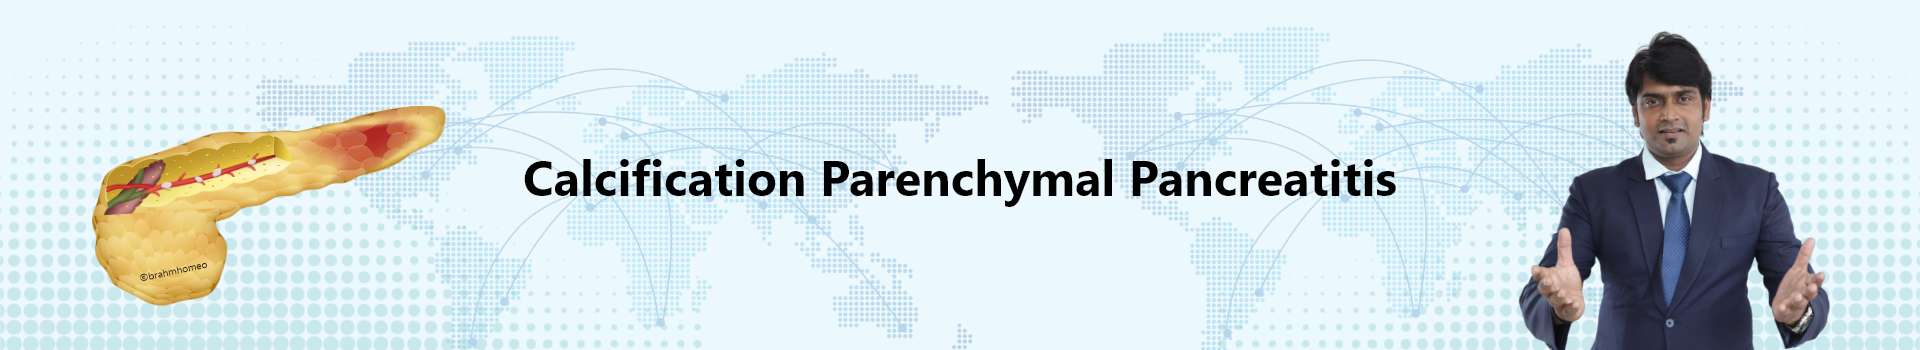 Calcification Parenchymal